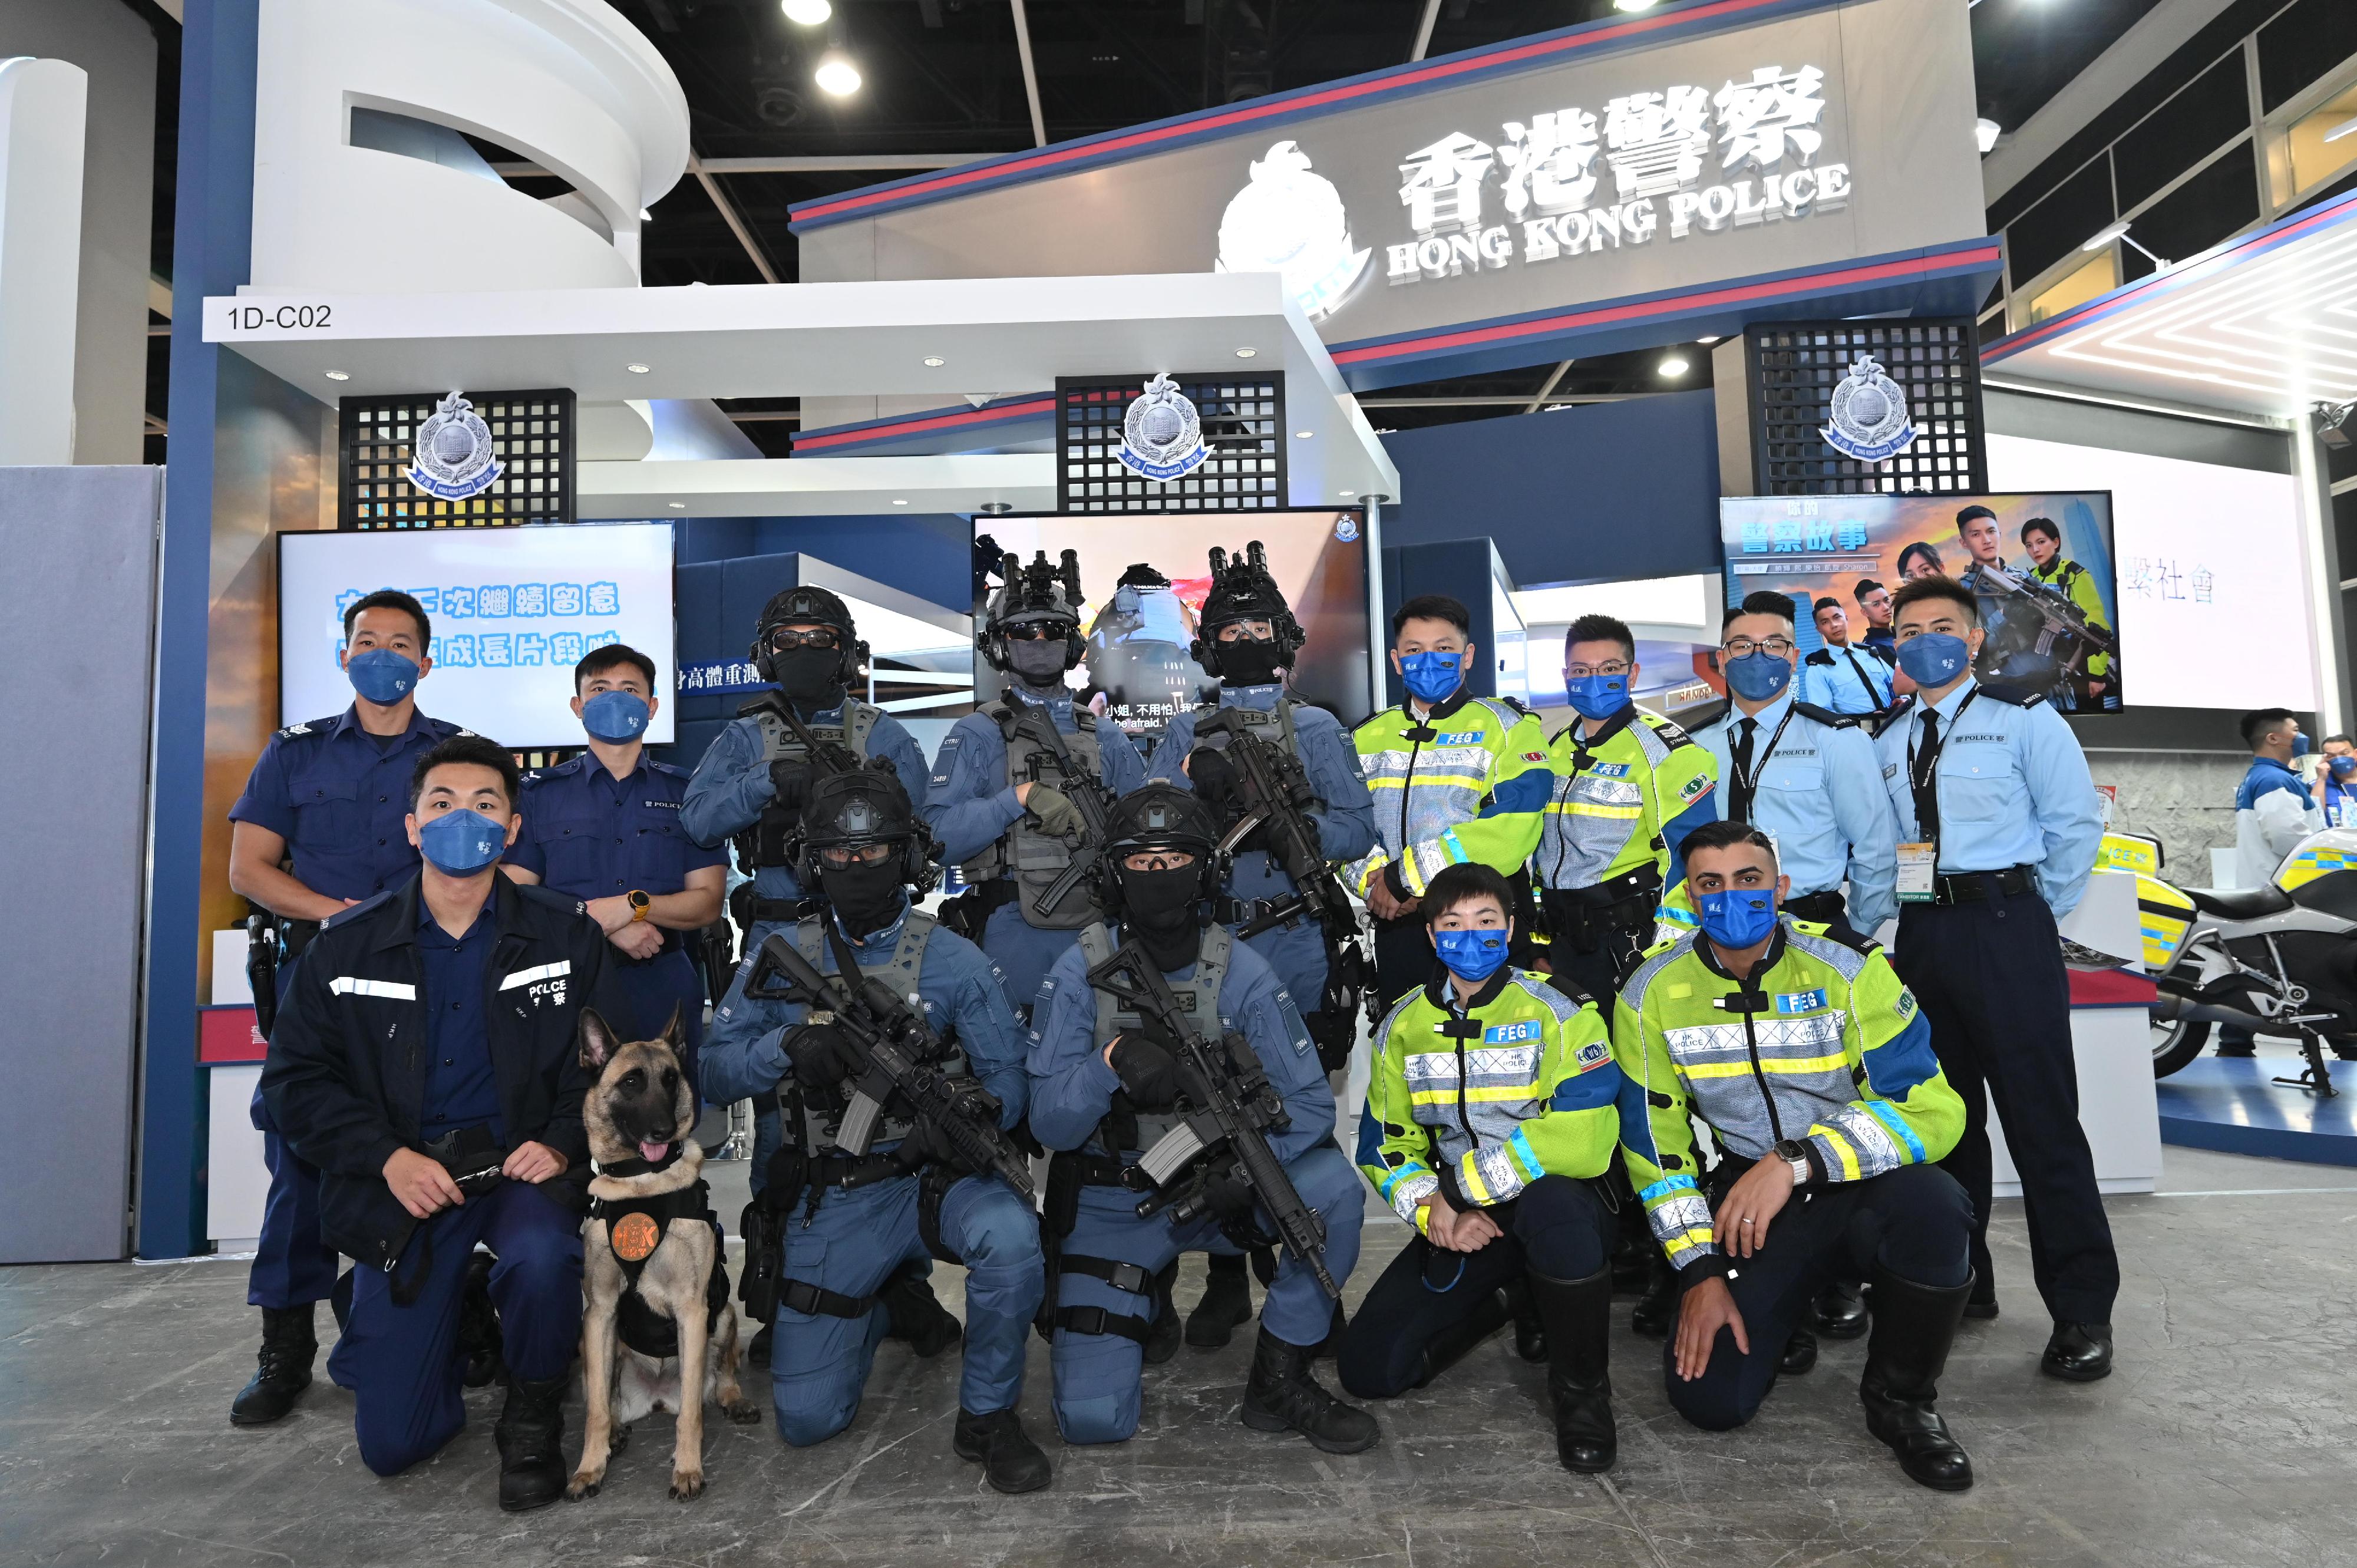 The Police Force introduces its work and provides recruitment information to visitors at the four-day Education and Careers Expo 2023 starting today (February 2). Photo shows Police Dog Unit, Counter Terrorism Response Unit and Force Escort Group attending the morning demonstration session.